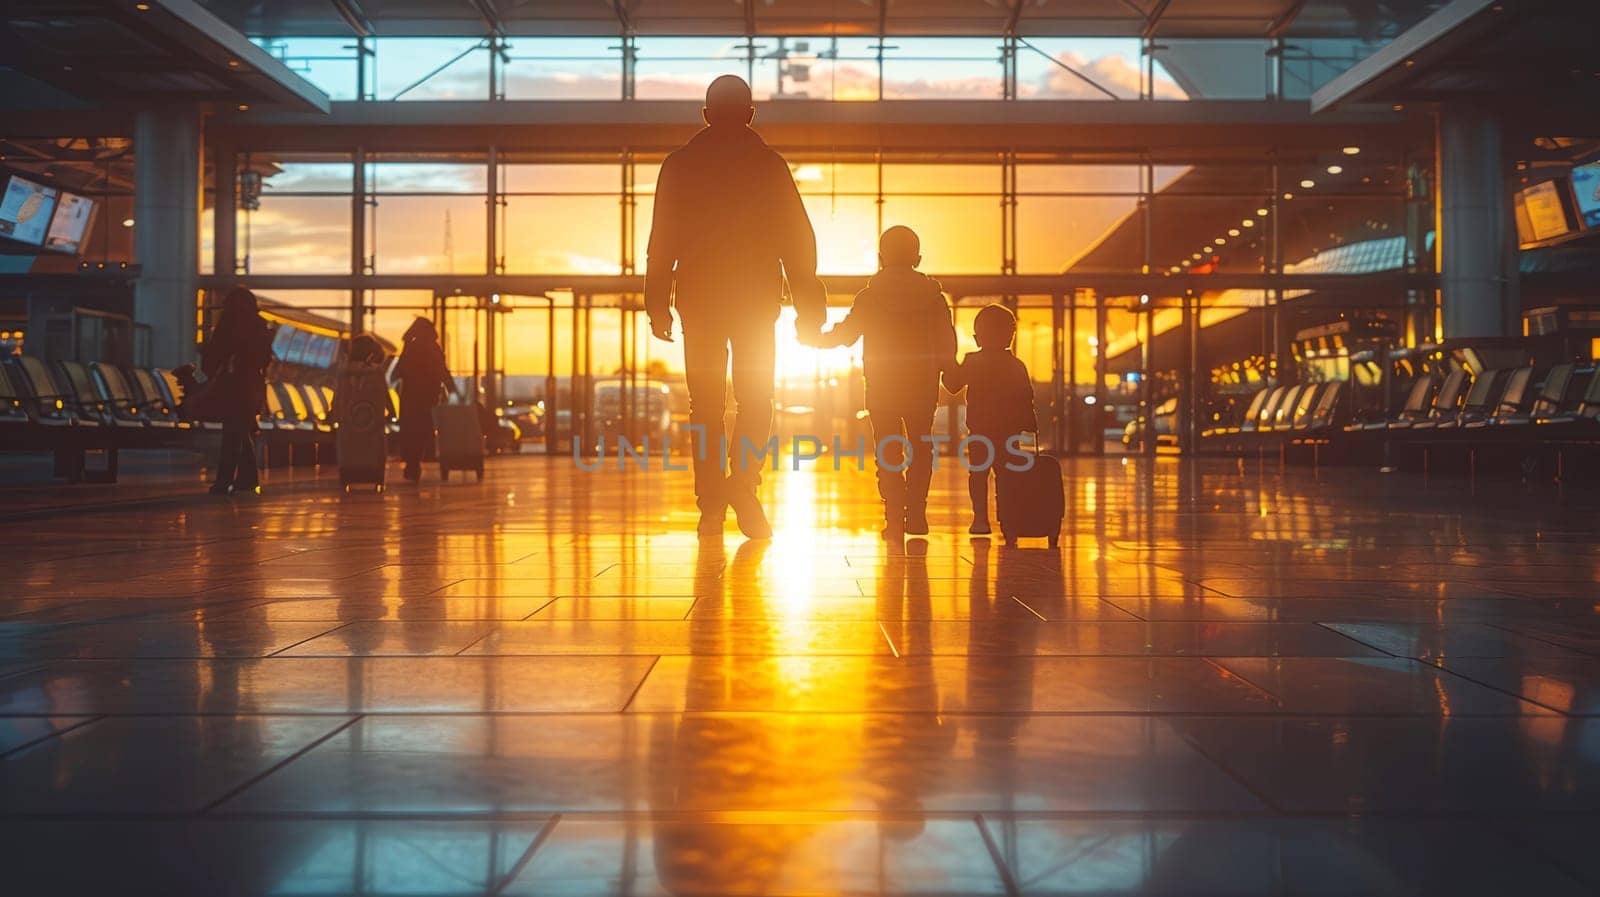 Silhouette of a family at the airport with a plane in the background at sunset by NataliPopova